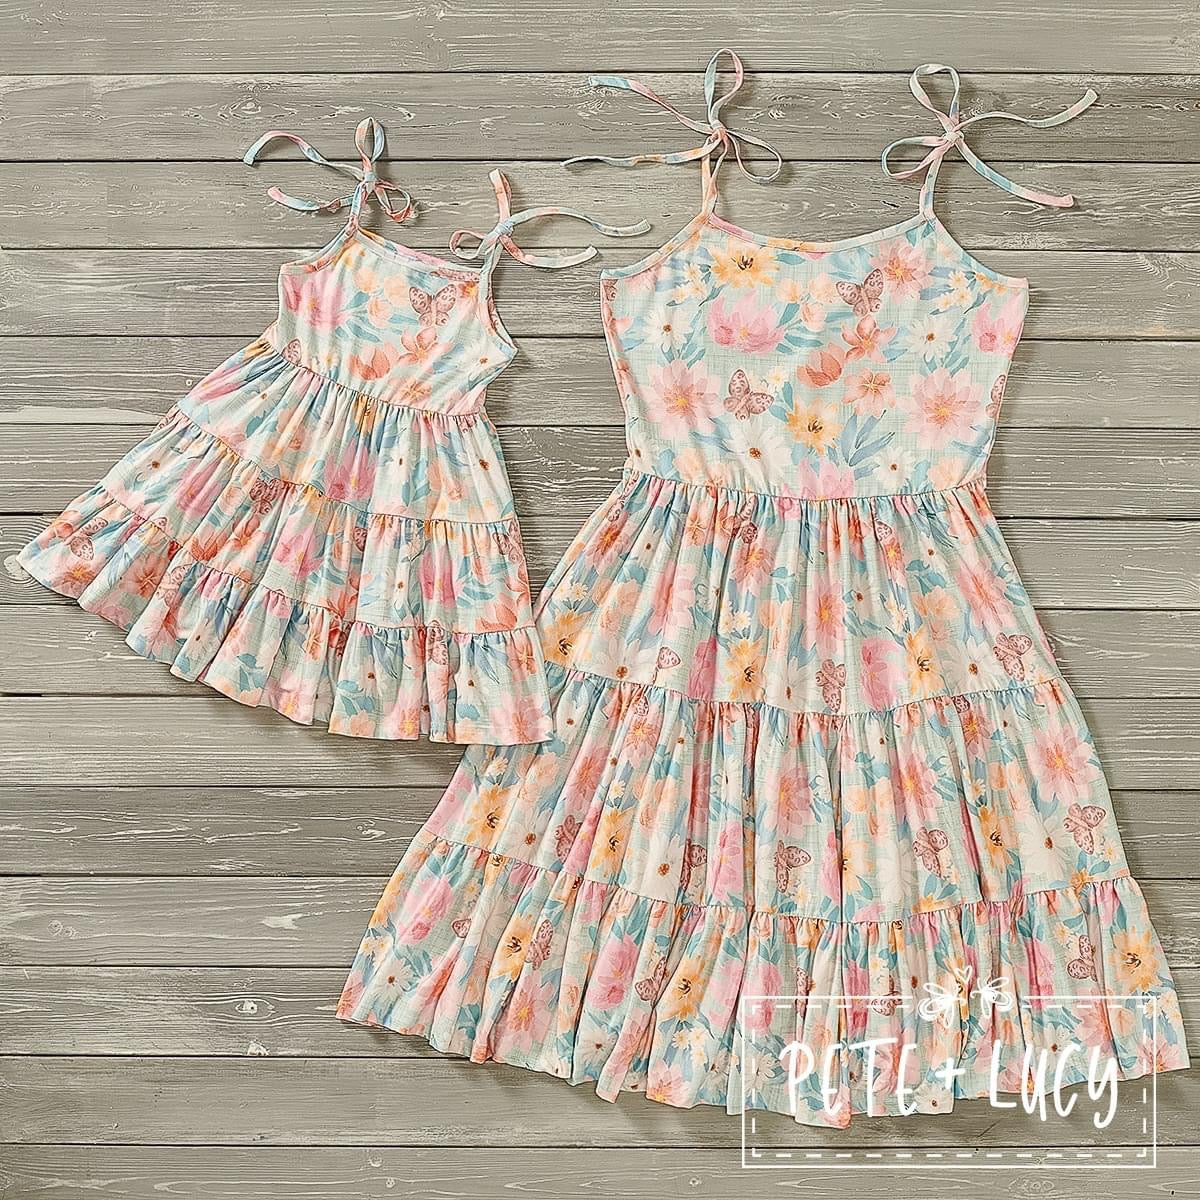 Summertime Meadow Girls Dress by Pete and Lucy